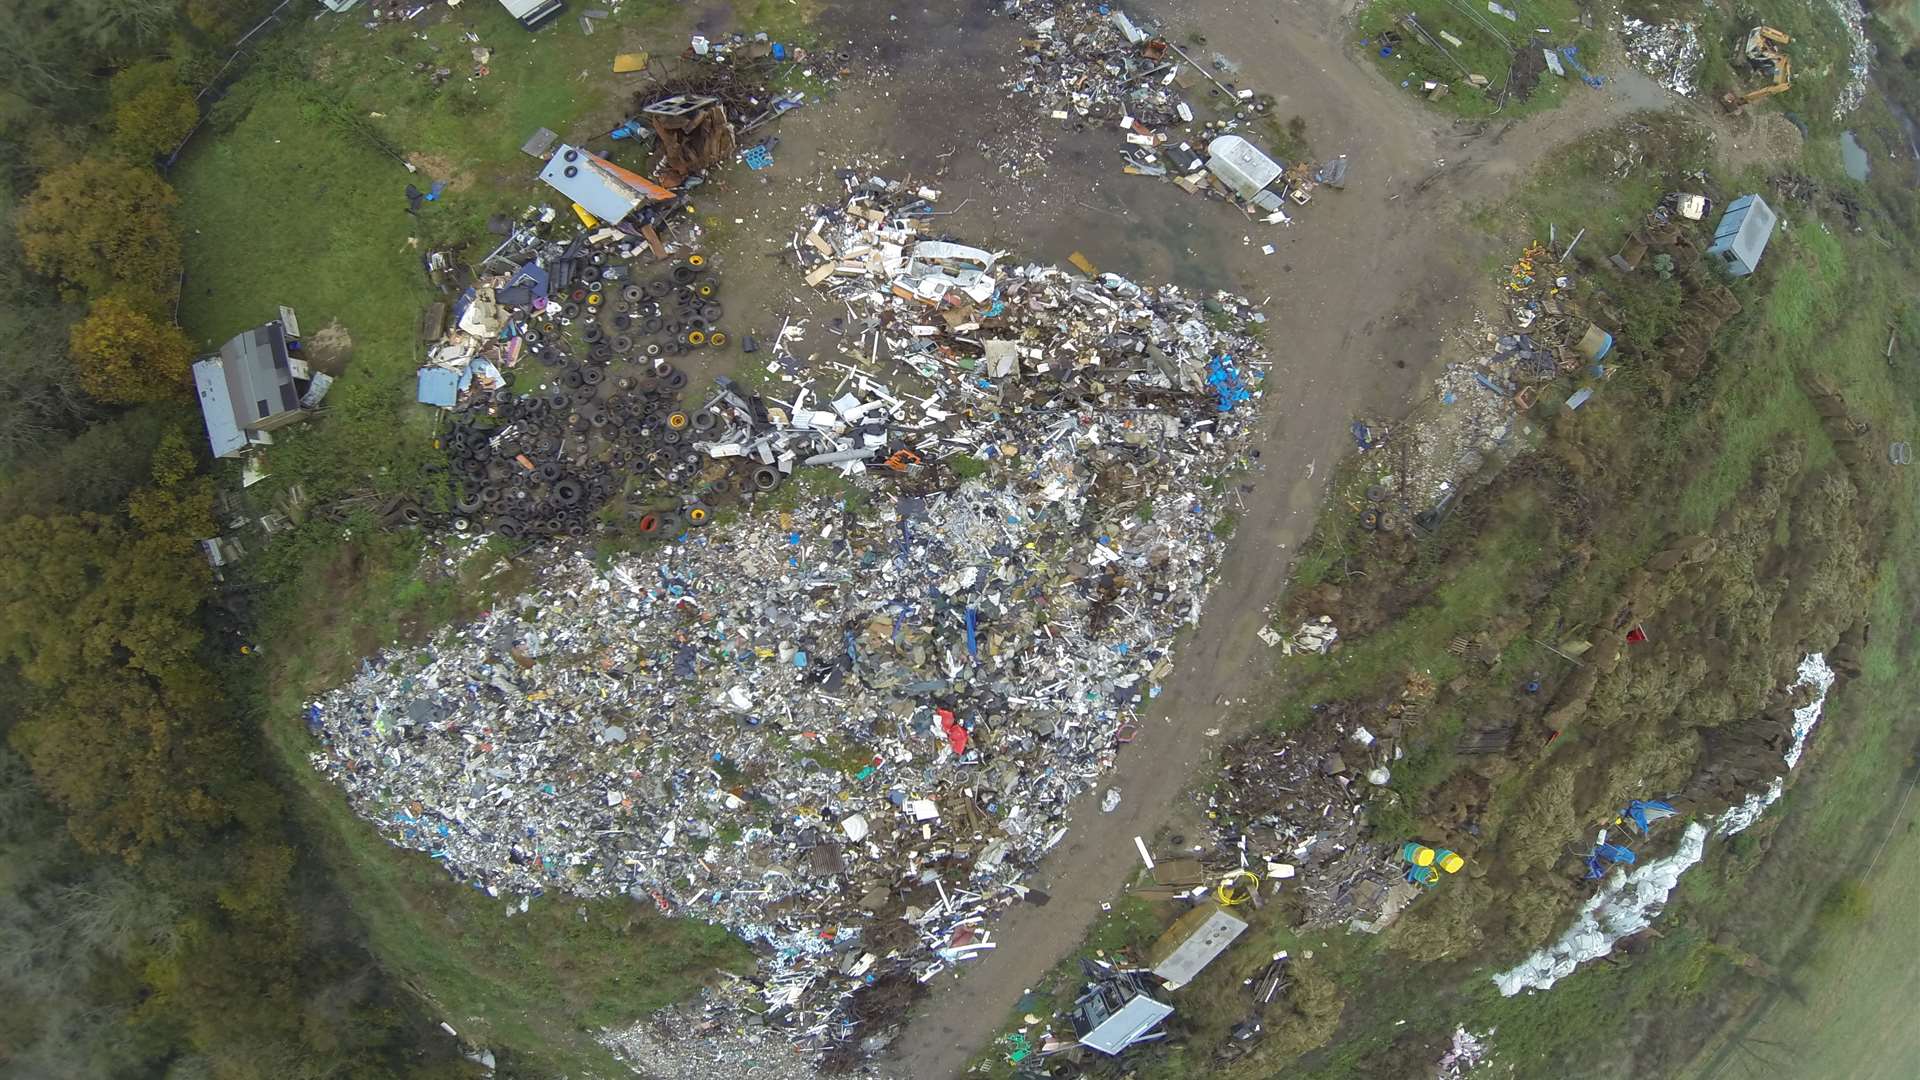 An aerial view of the illegal rubbish dump at Larkey Wood Farm